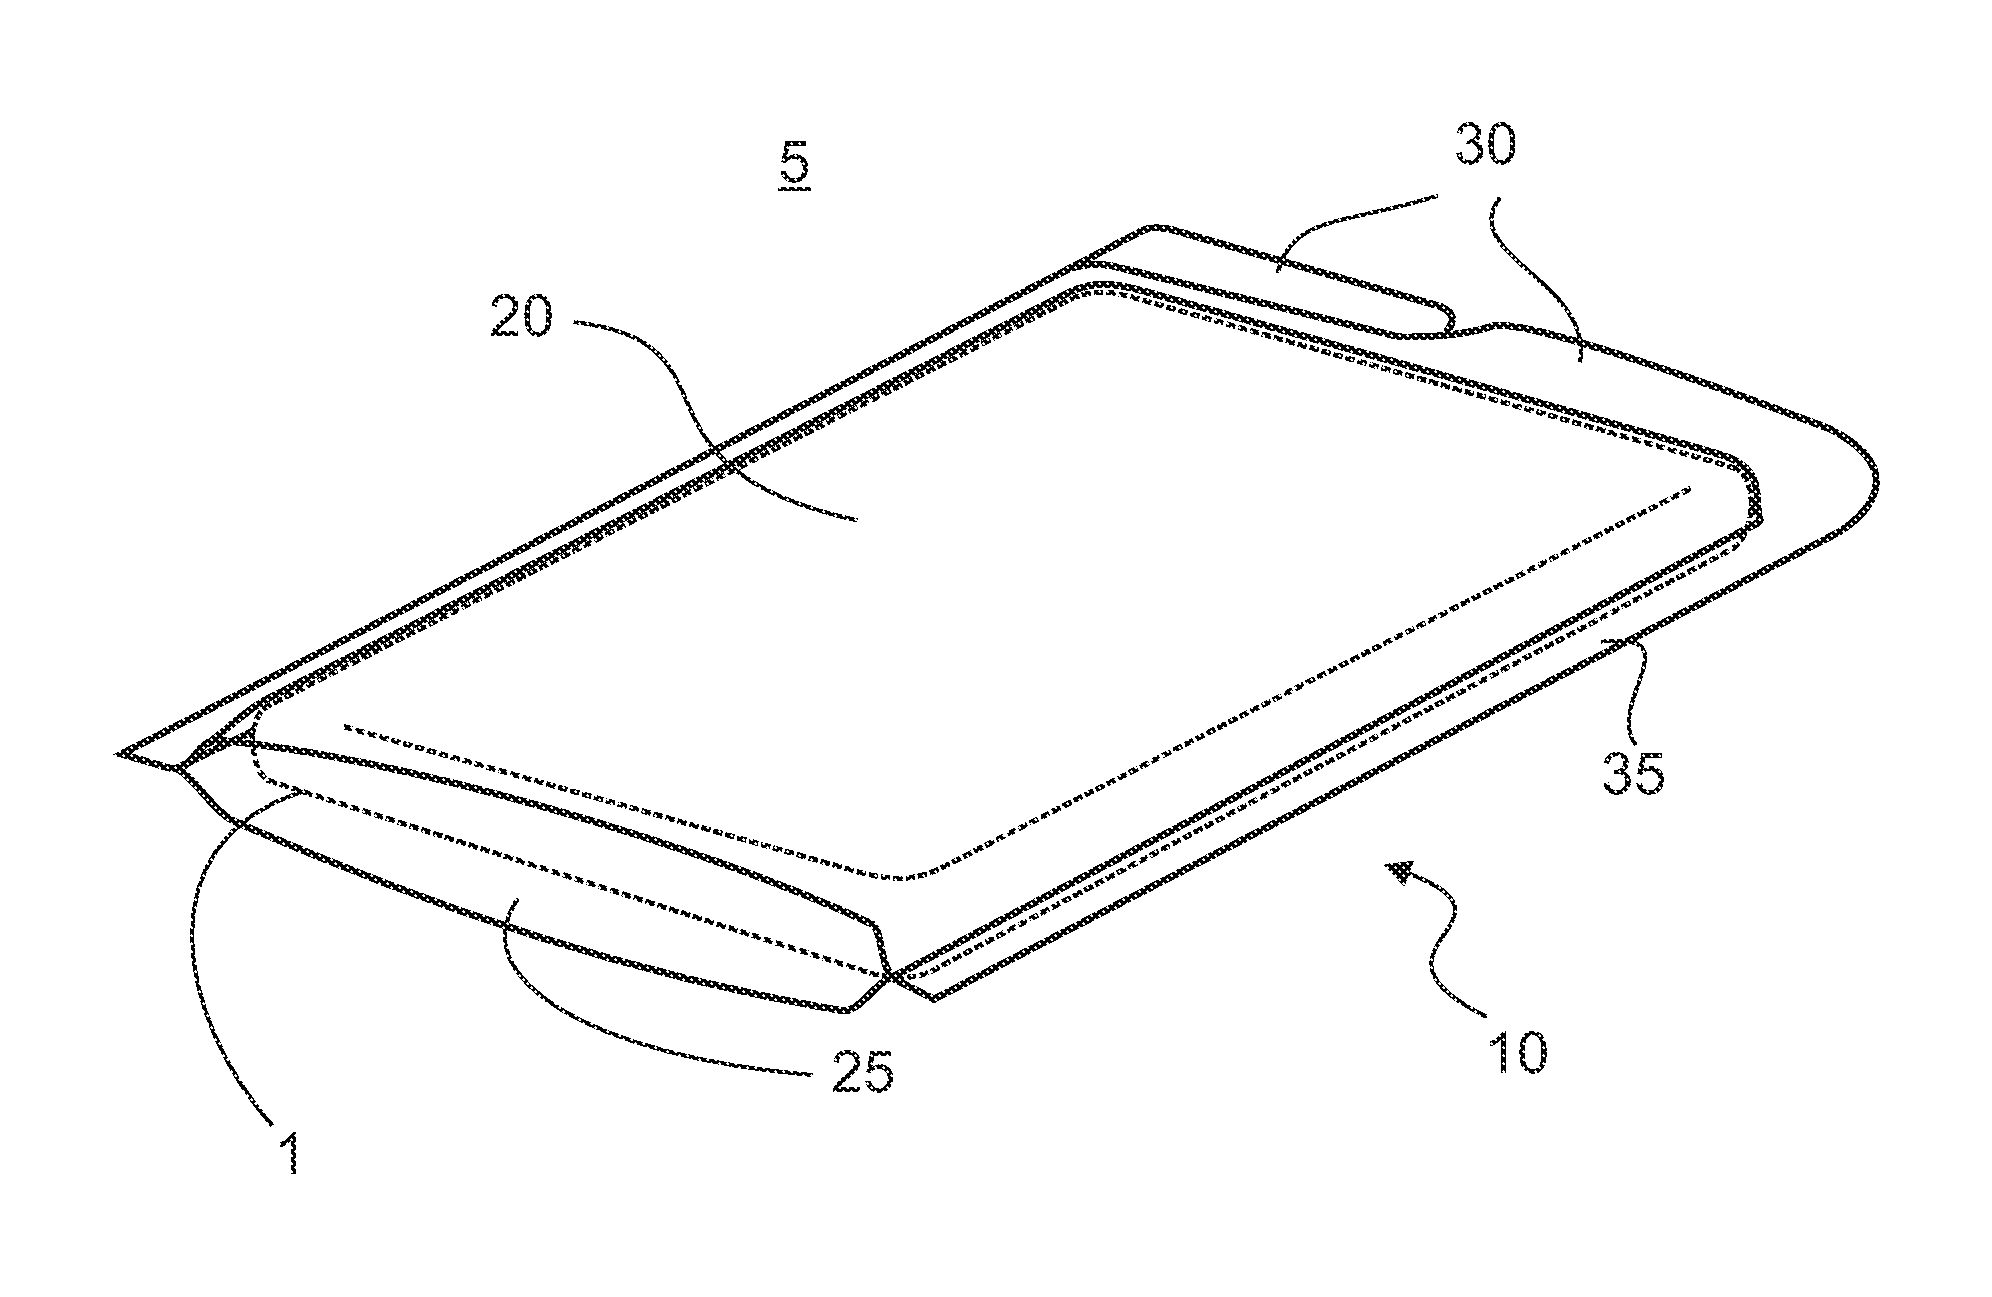 Isolation system for a mobile computing device